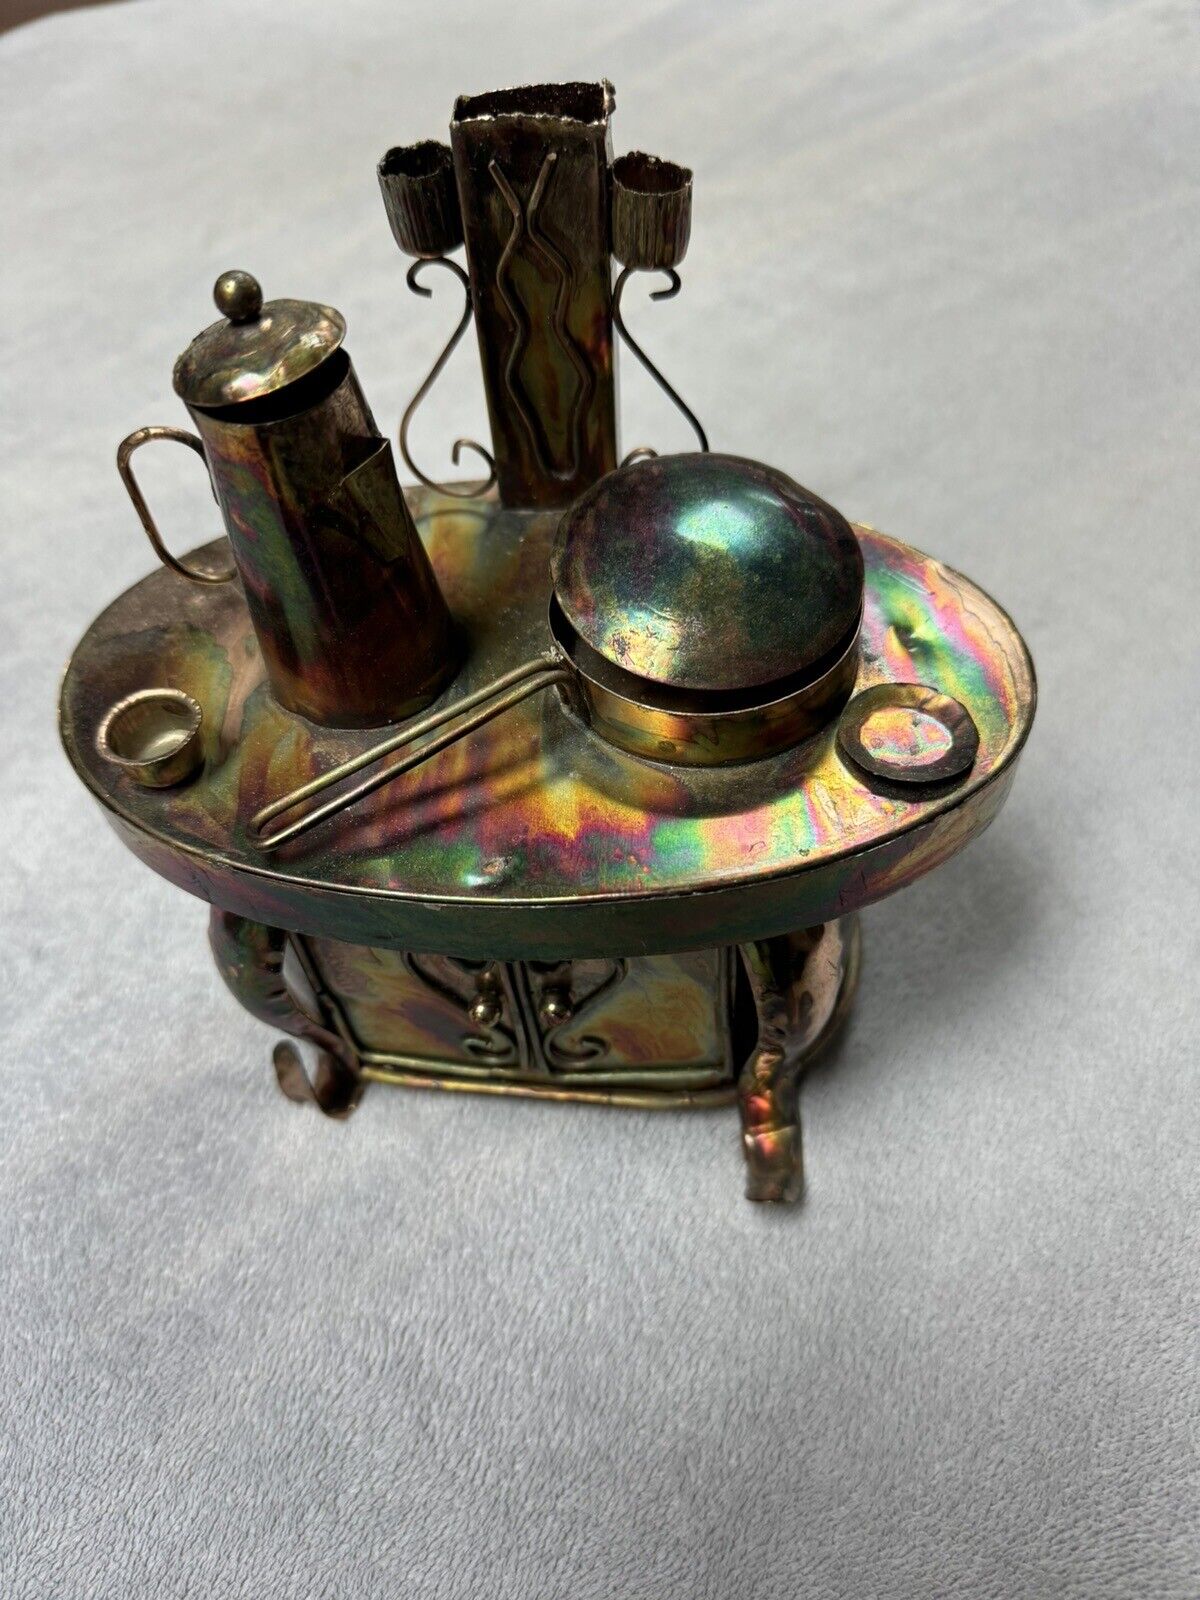 Vintage Copper Tone Tin Wood Stove Music Box Plays “Oh, What A Beautiful Morning